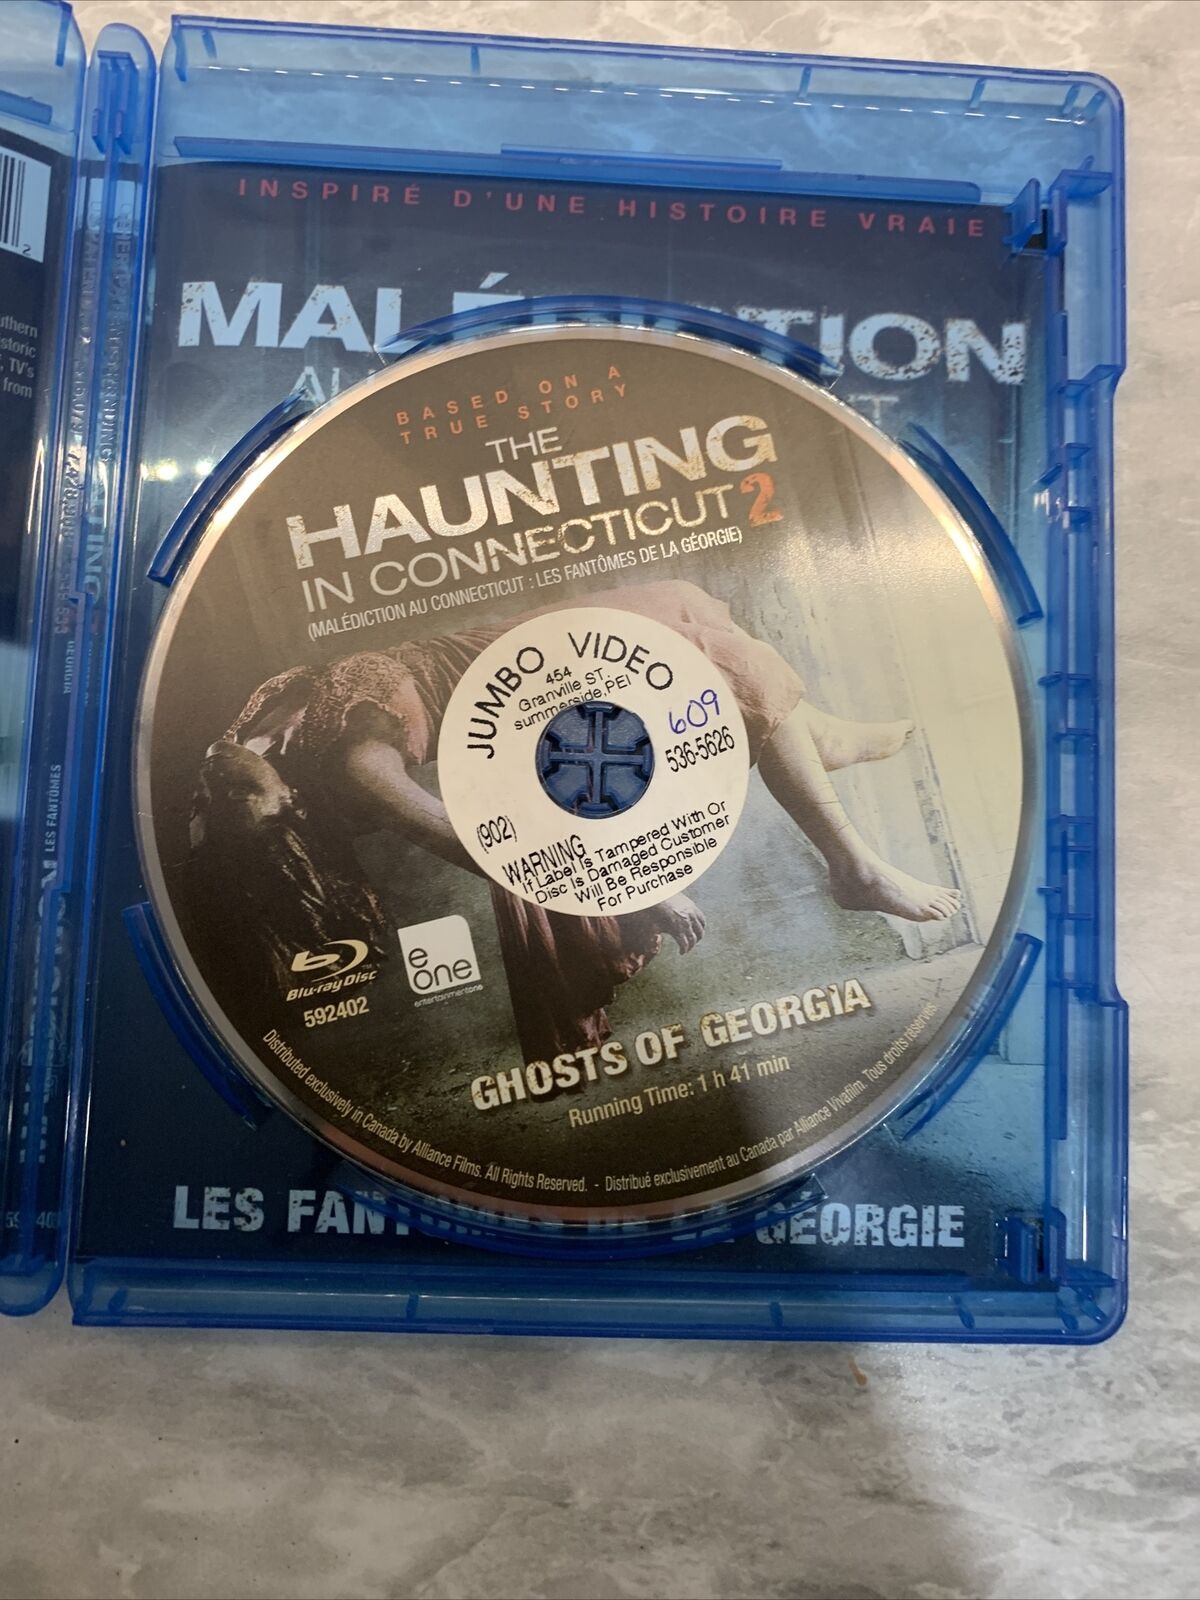 The Haunting in Connecticut 2 (Bluray, 2013)